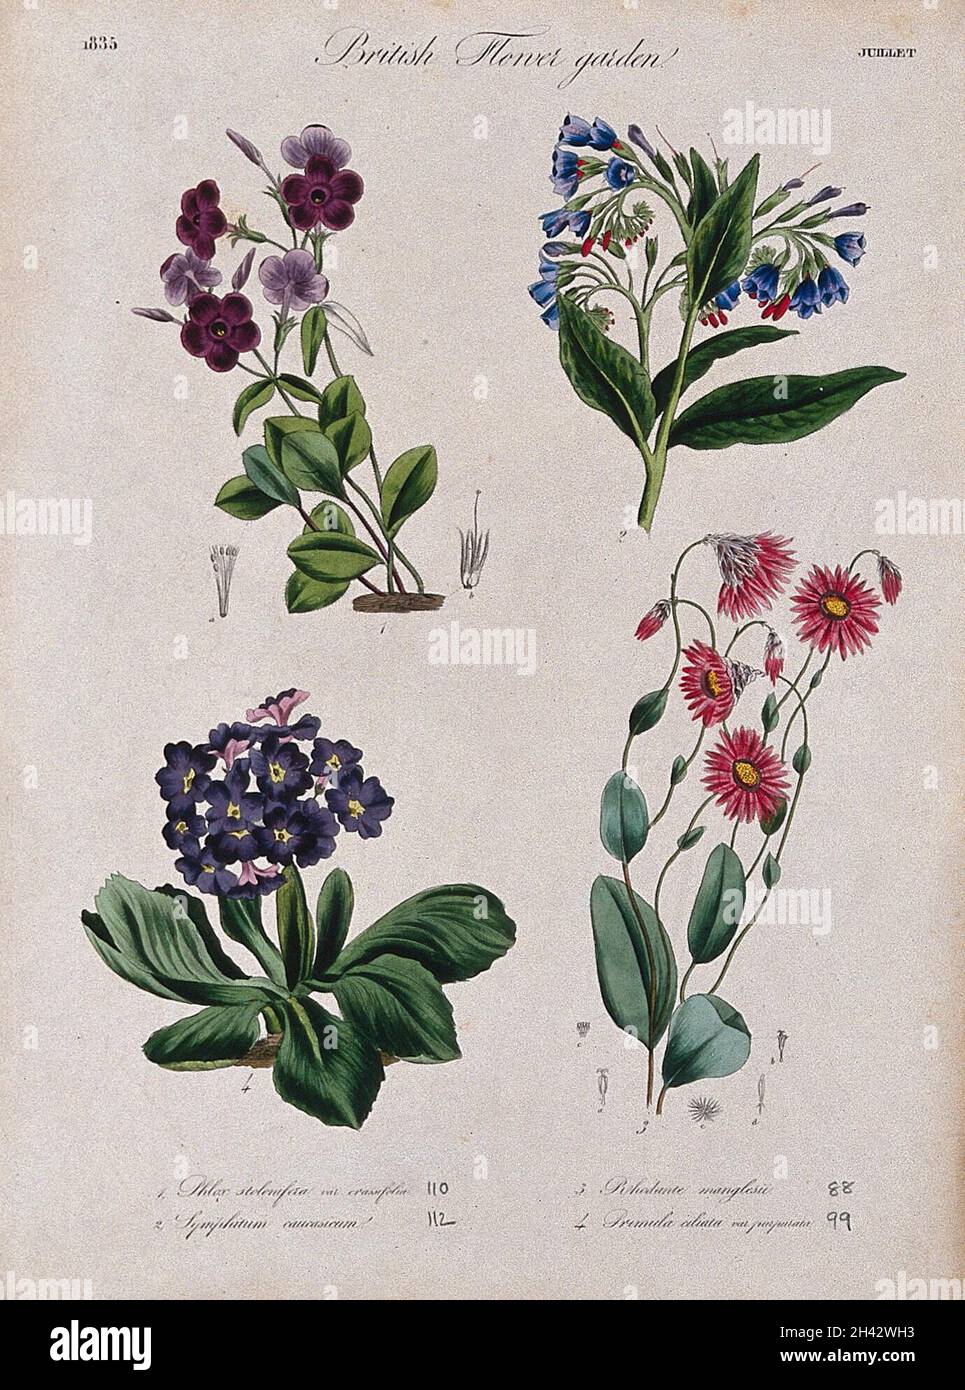 Four British garden plants, including a phlox: flowering stems and floral segments. Coloured etching, c. 1835. Stock Photo